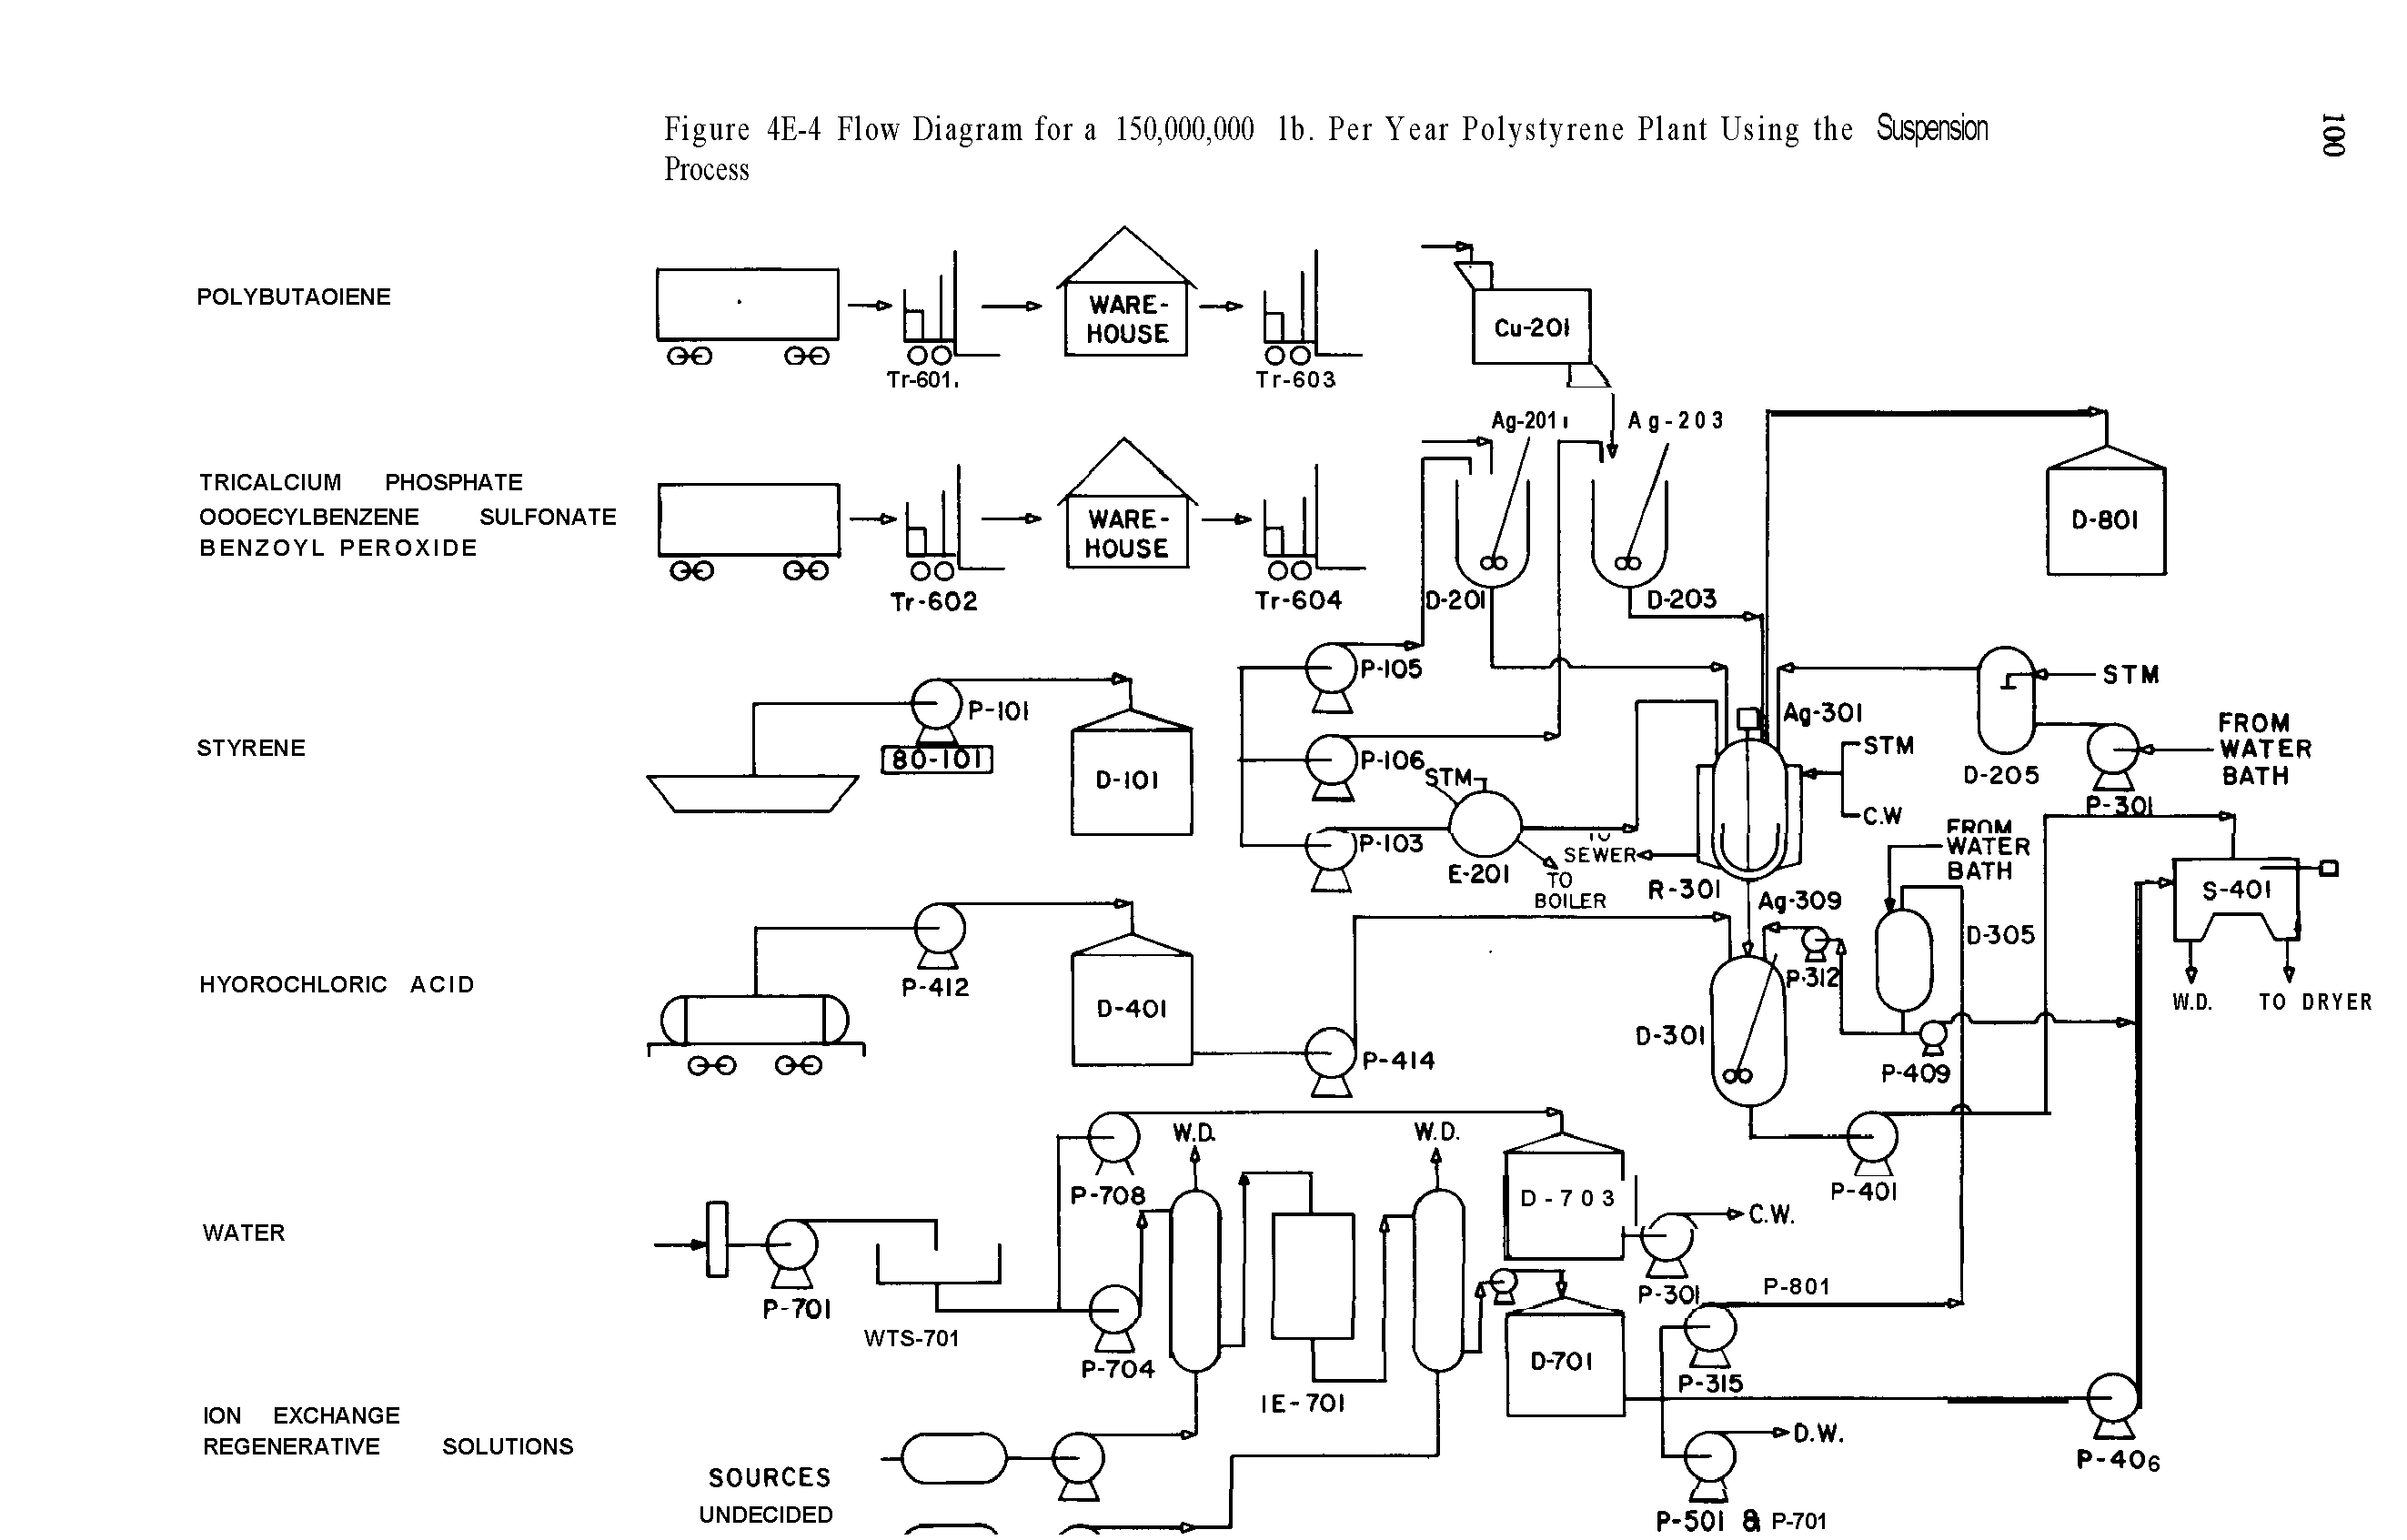 Figure 4E-4 Flow Diagram for a 150,000,000 lb. Per Year Polystyrene Plant Using the Suspension Process...